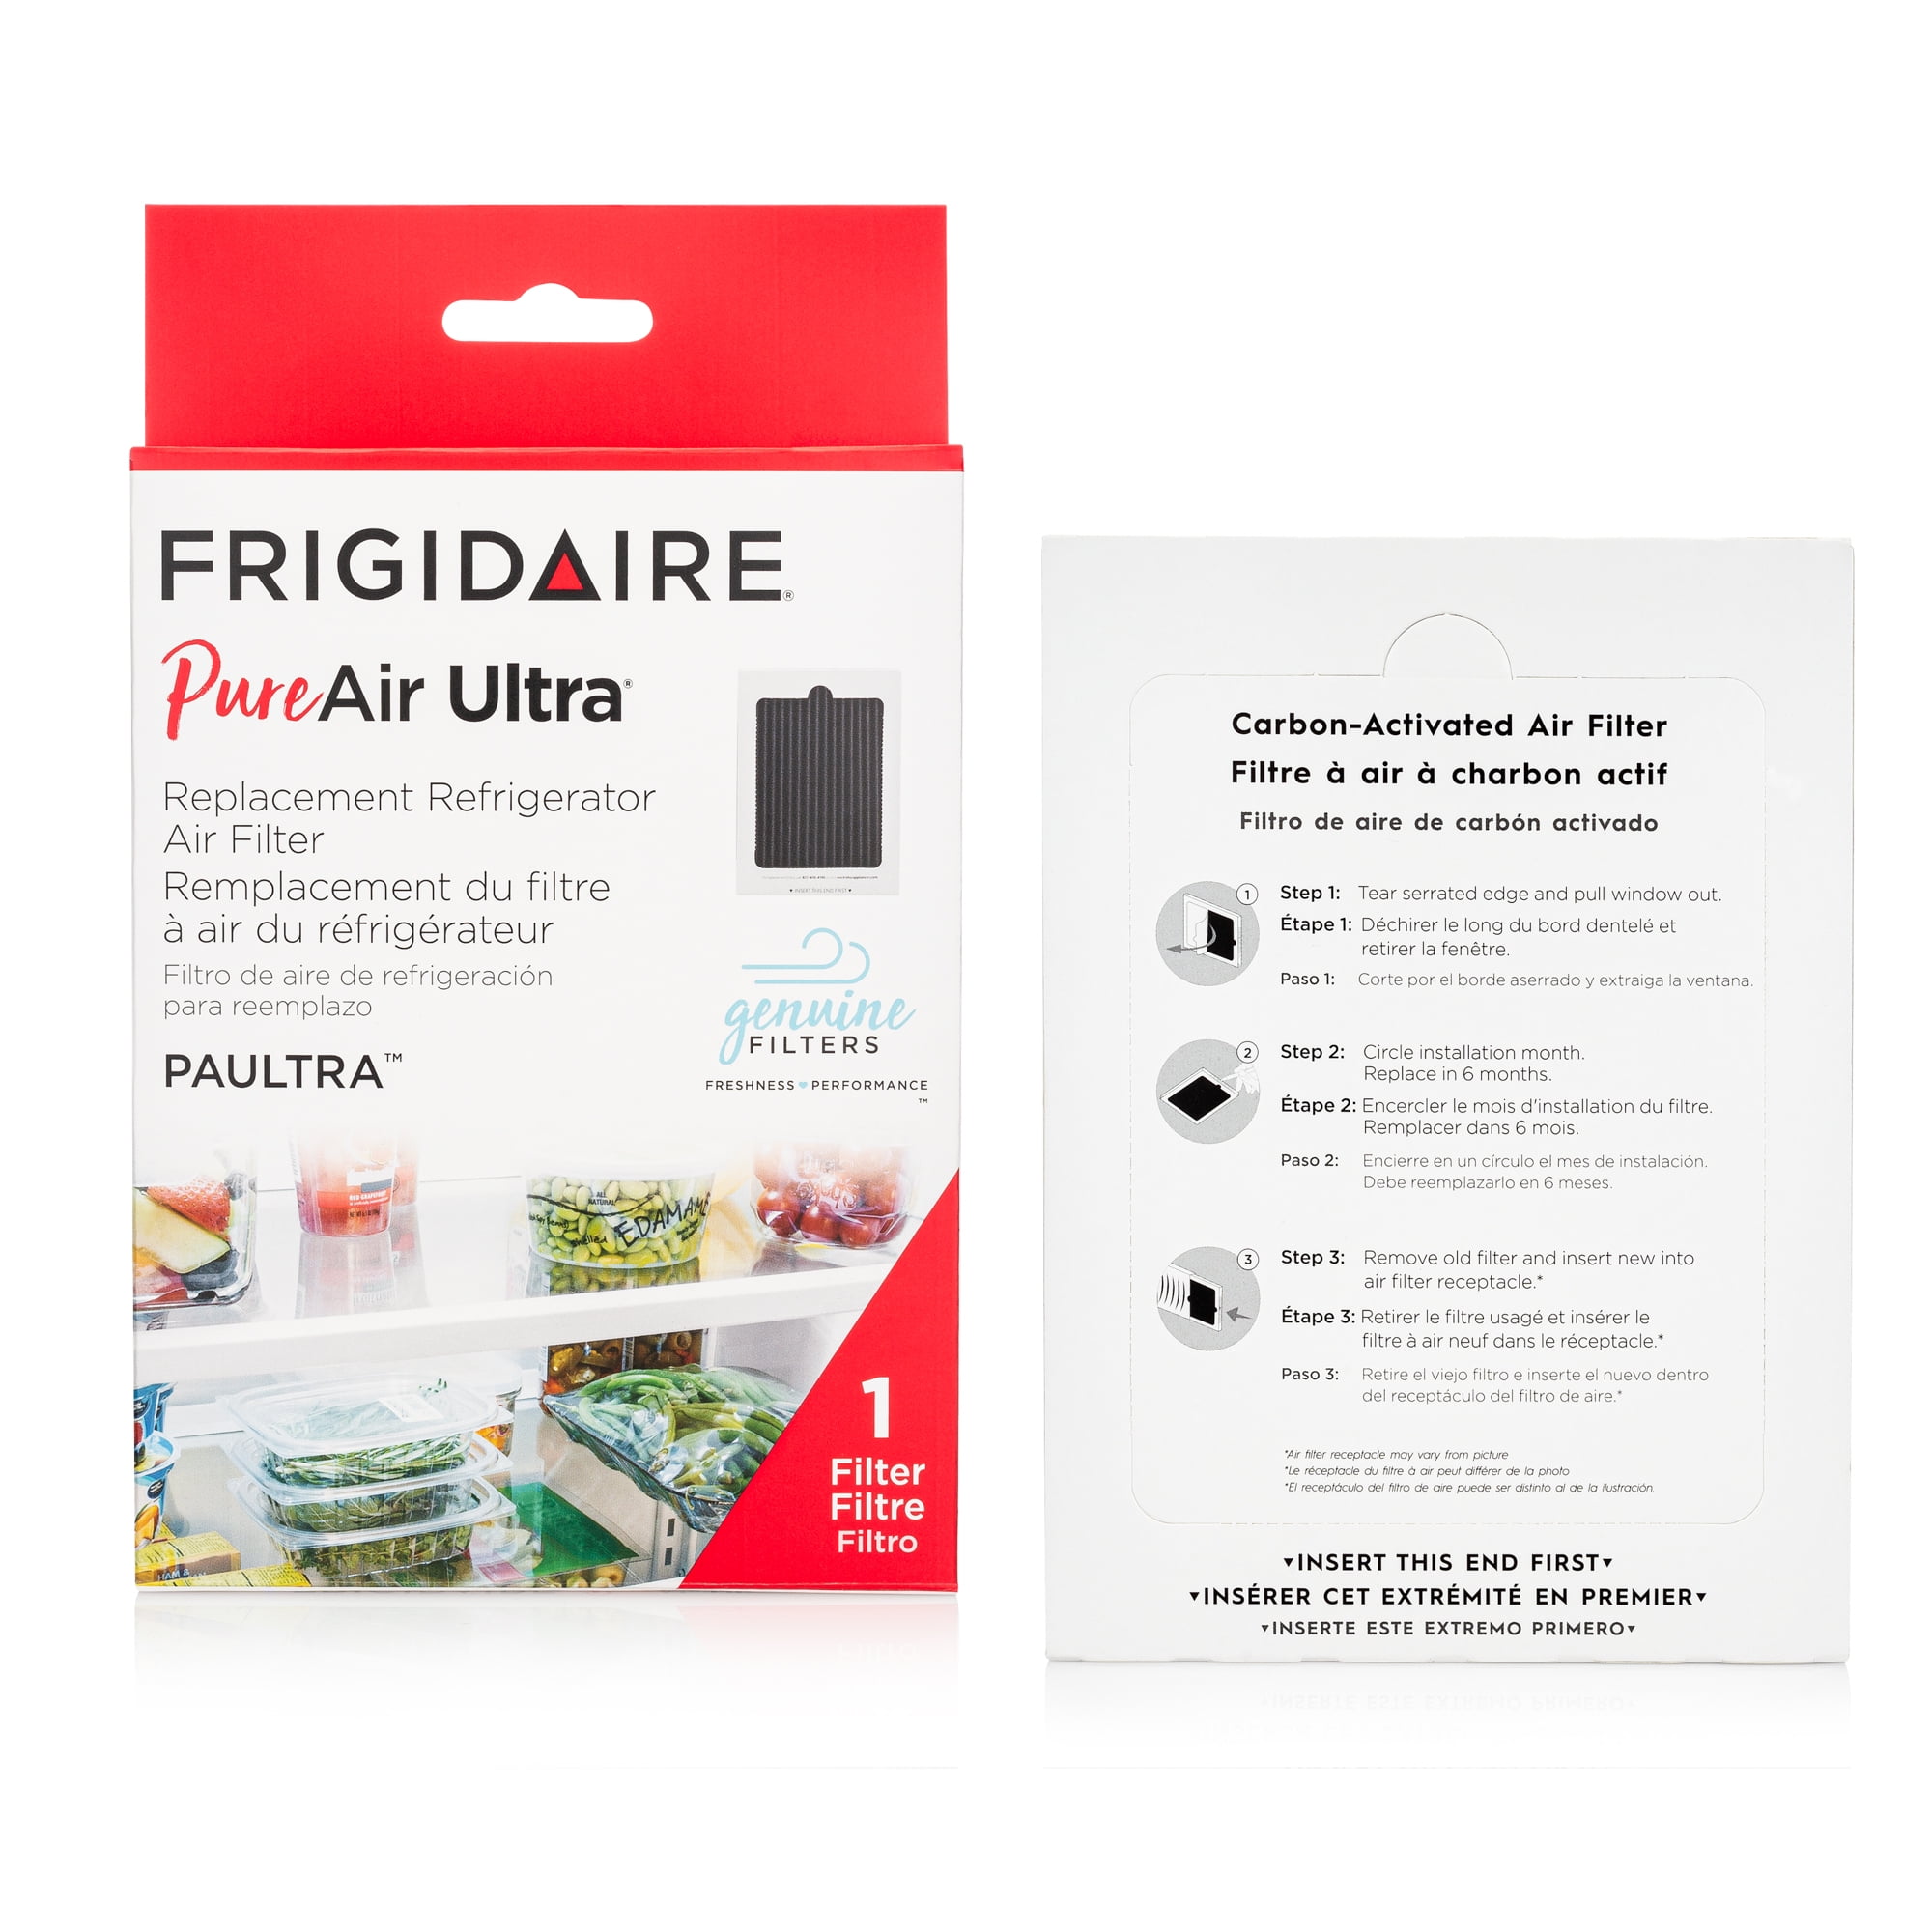 Refrigerator Air Filter Replacement For Frigidaire Paultra Pureair 8 Filters 